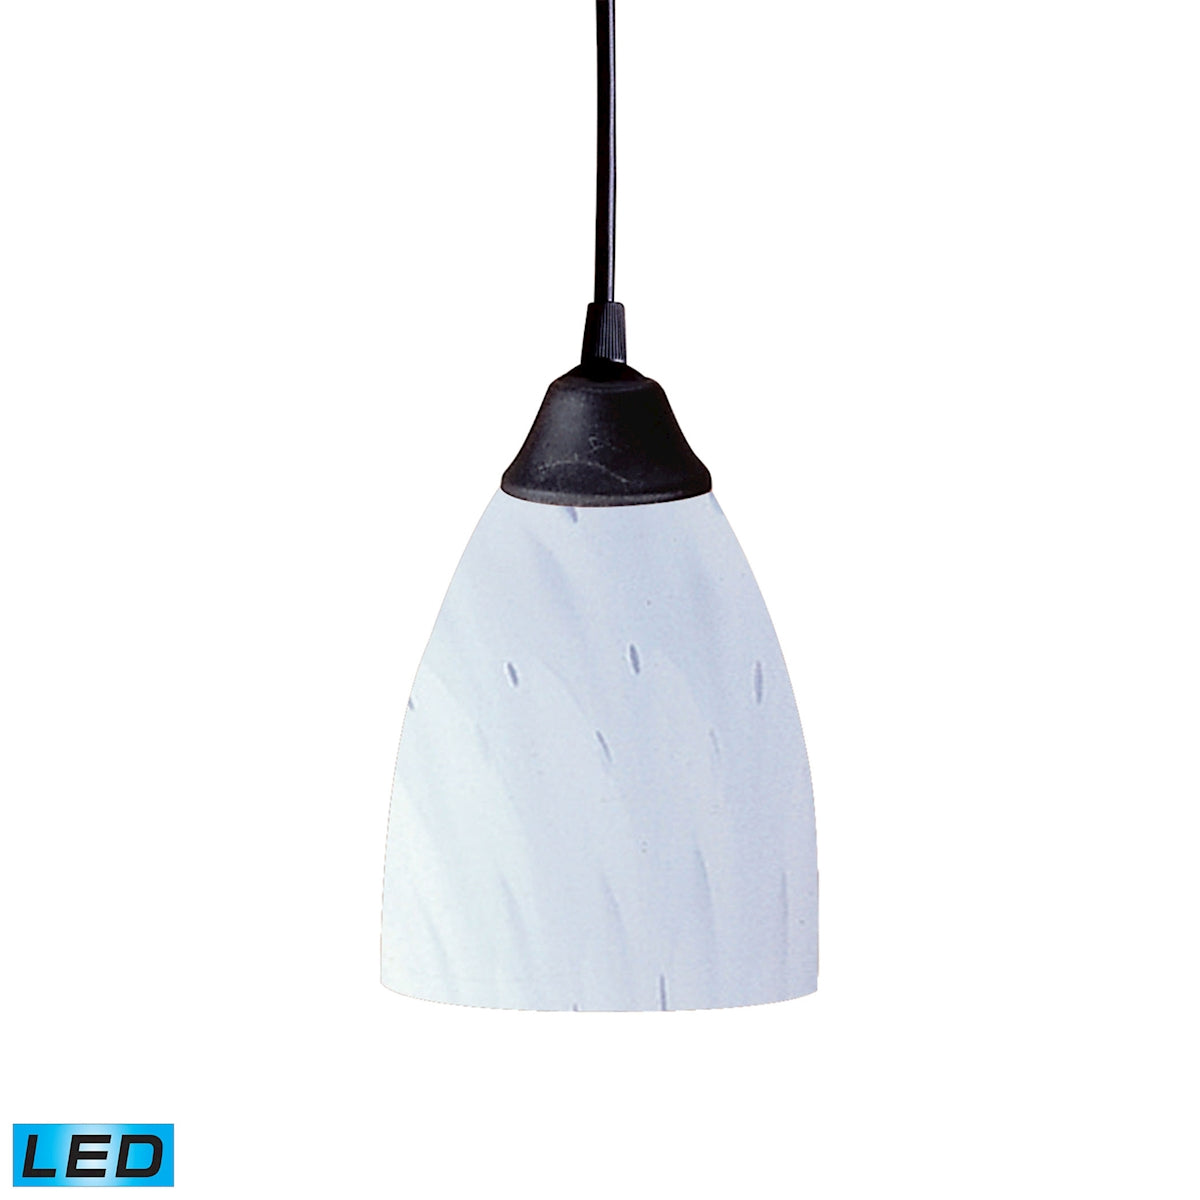 ELK Lighting 406-1WH-LED Classico 1-Light Mini Pendant in Dark Rust with Simple White Glass - Includes LED Bulb